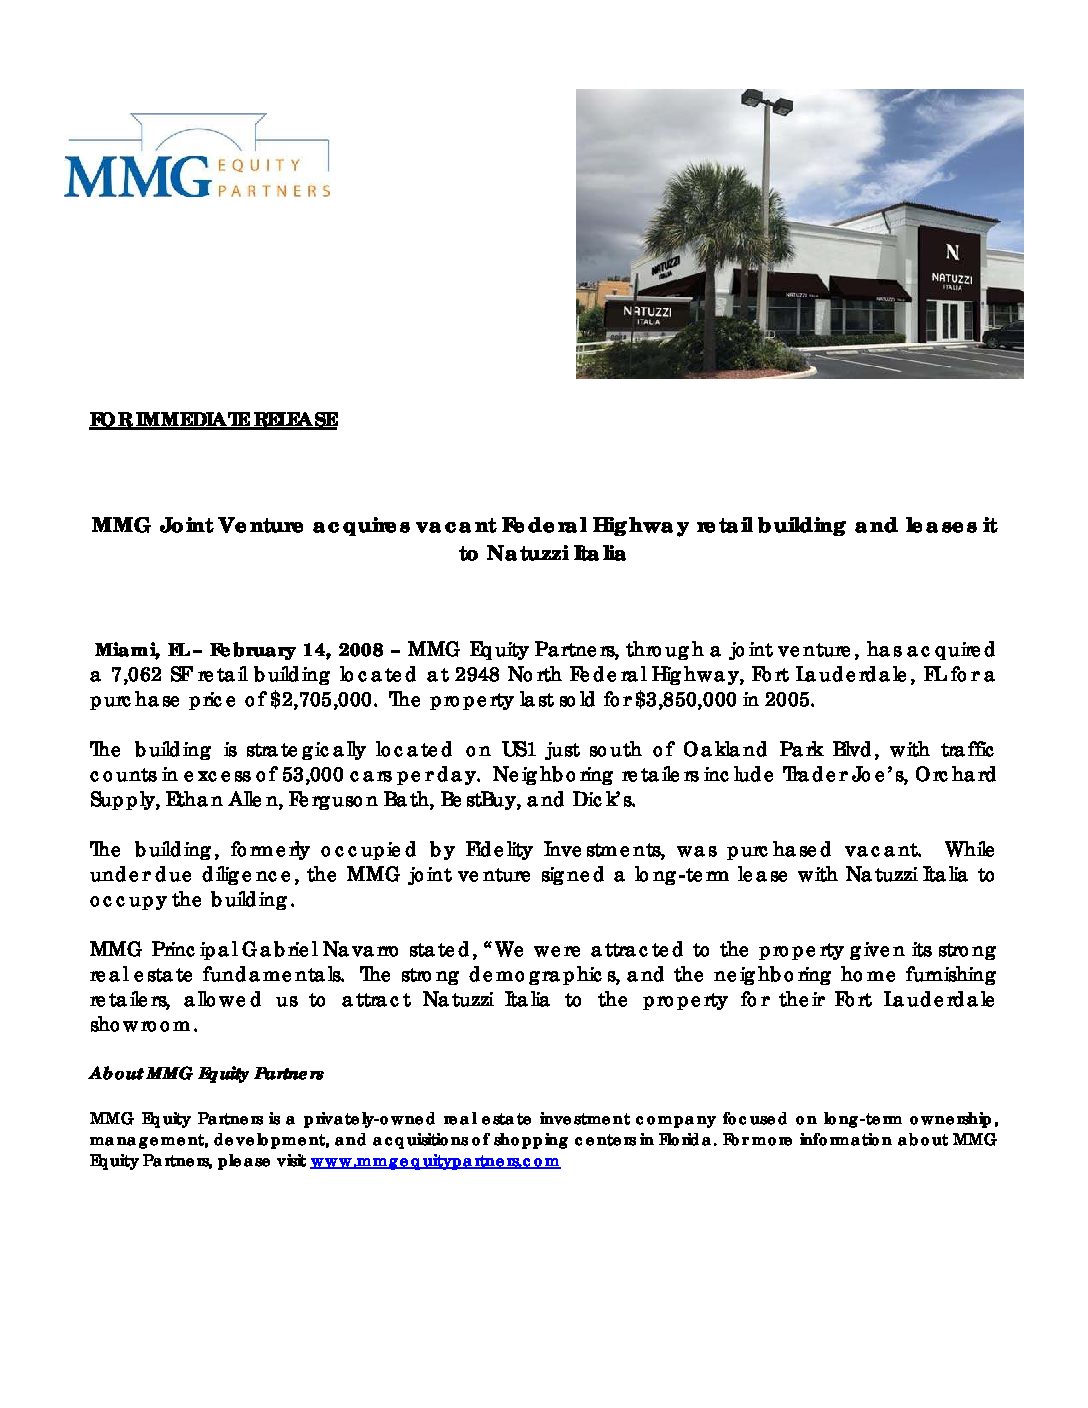 MMG Acquires FLL Retail Building and leases it to Natuzzi SpA